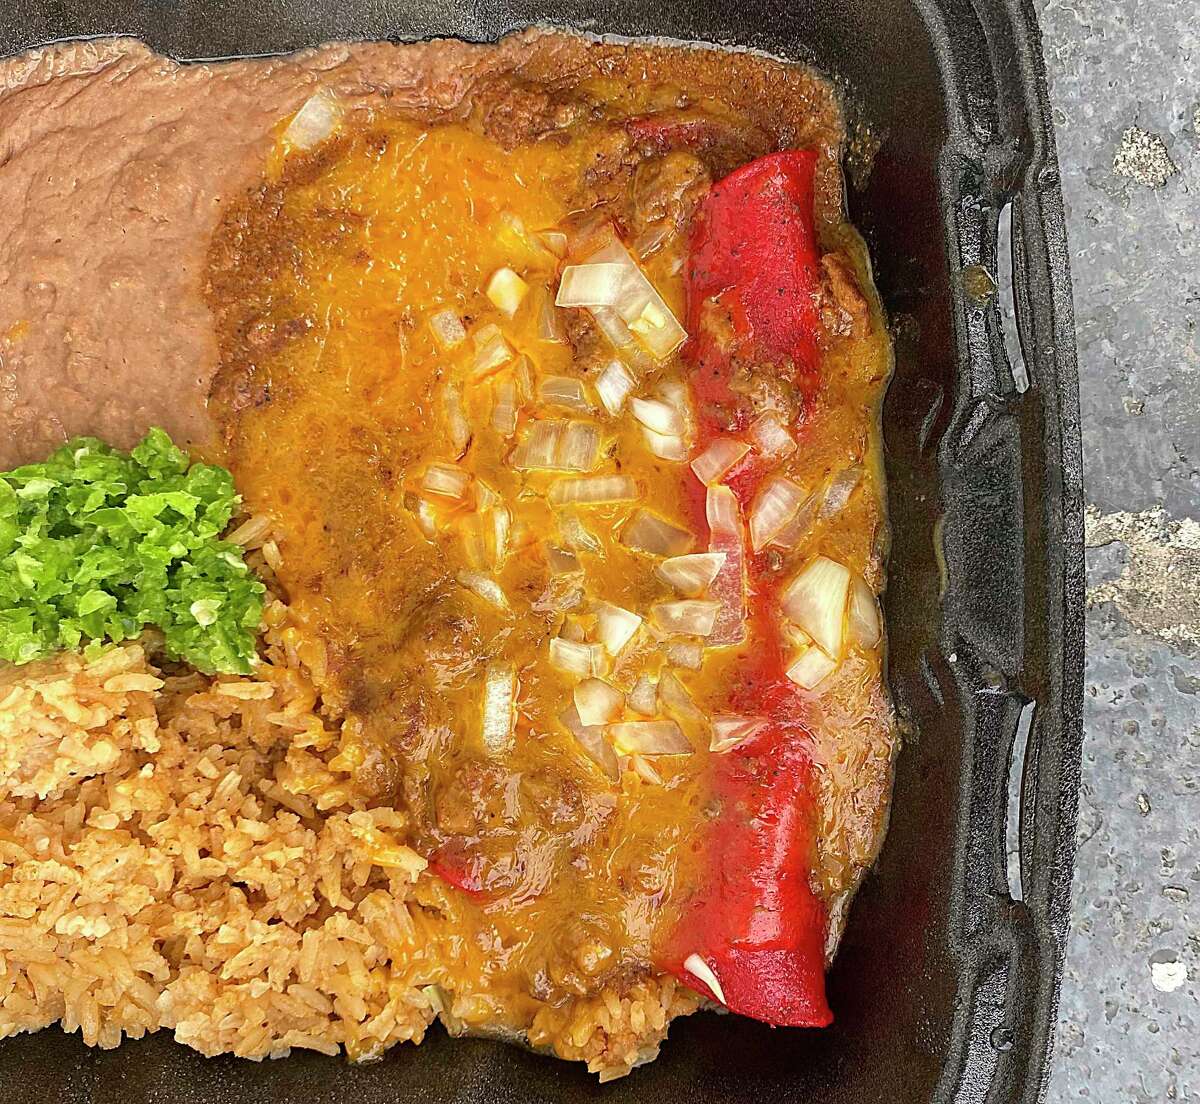 Takeout options include Mexican Dinner # 5 with cheese enchiladas, chili con carne sauce, rice, and beans at Garcia's Mexican Food.